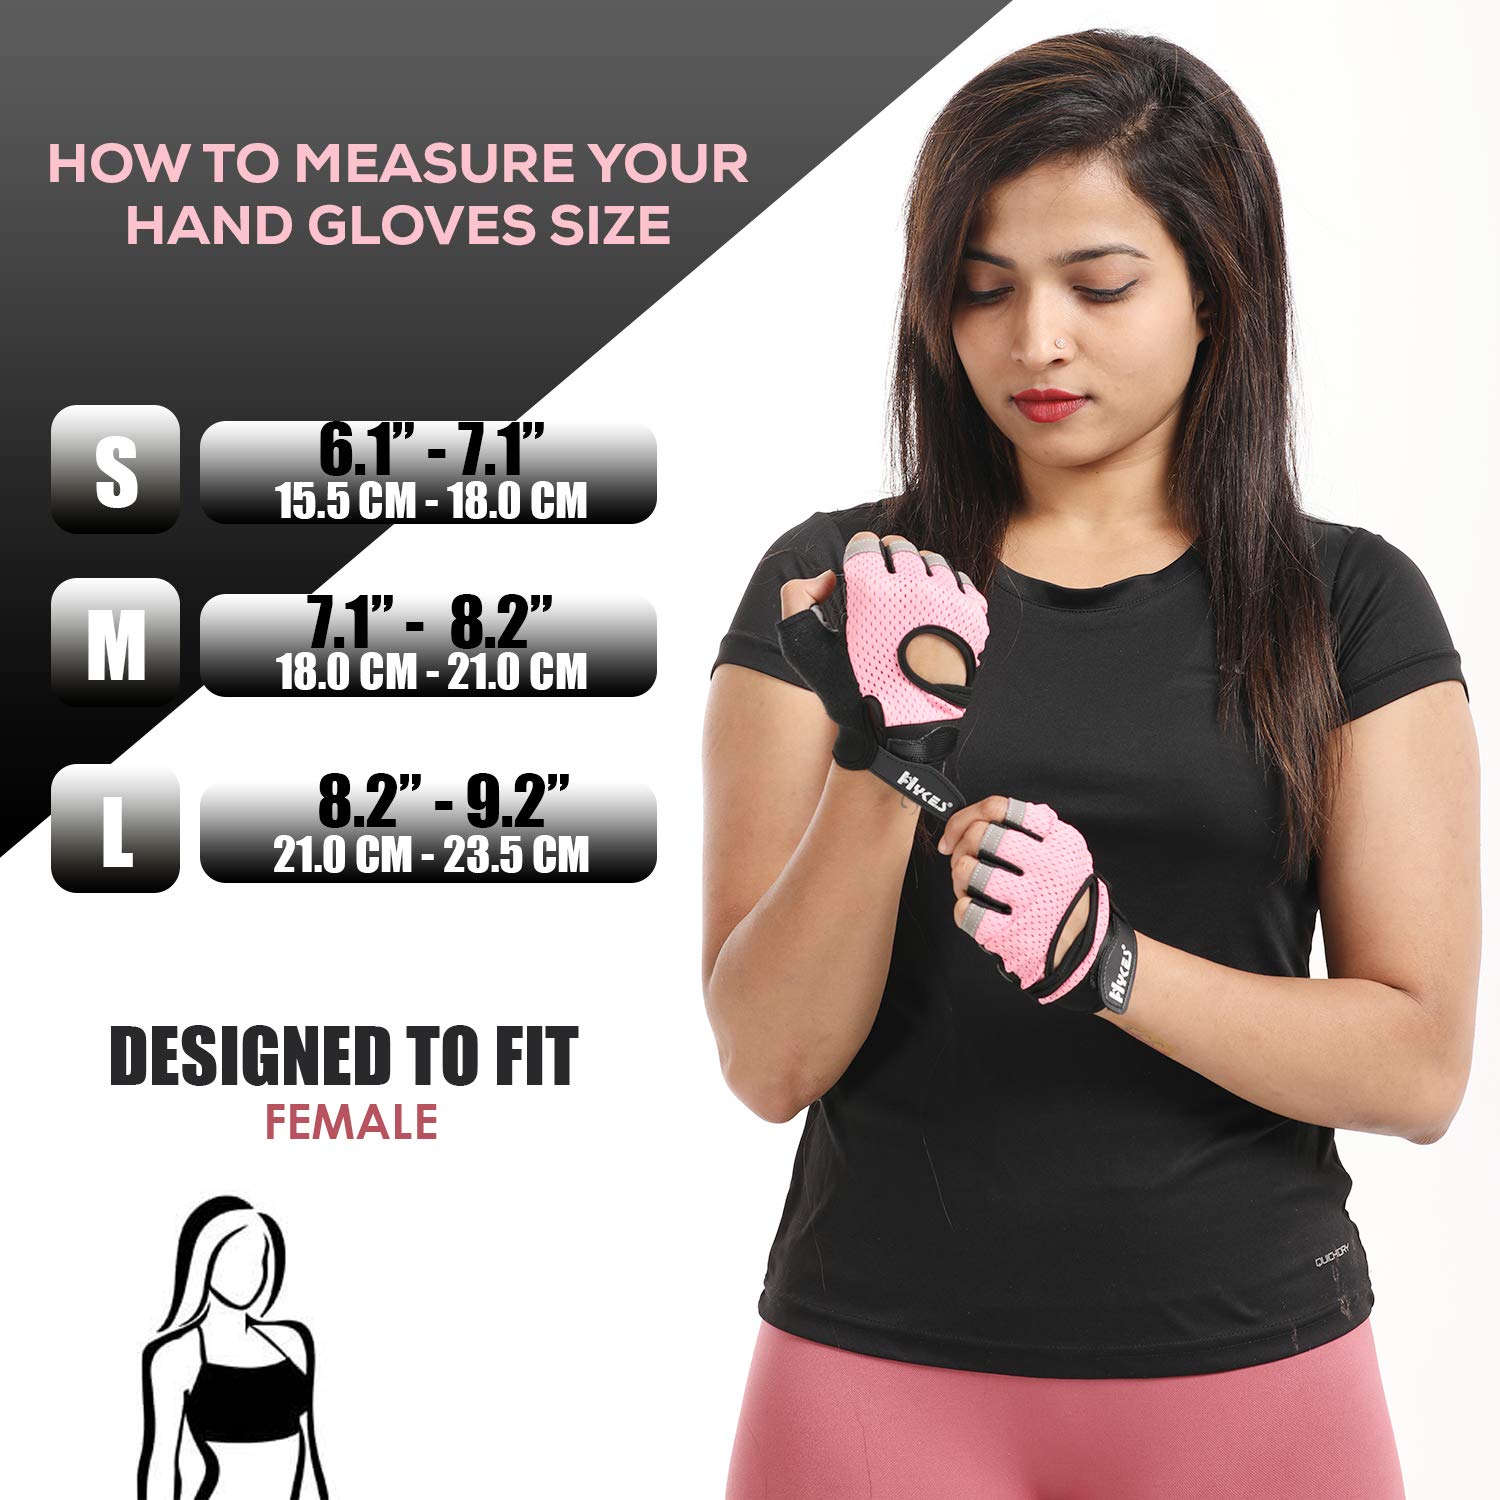 Shop Gym Gloves for Women Online | Gym Hand Gloves for Ladies